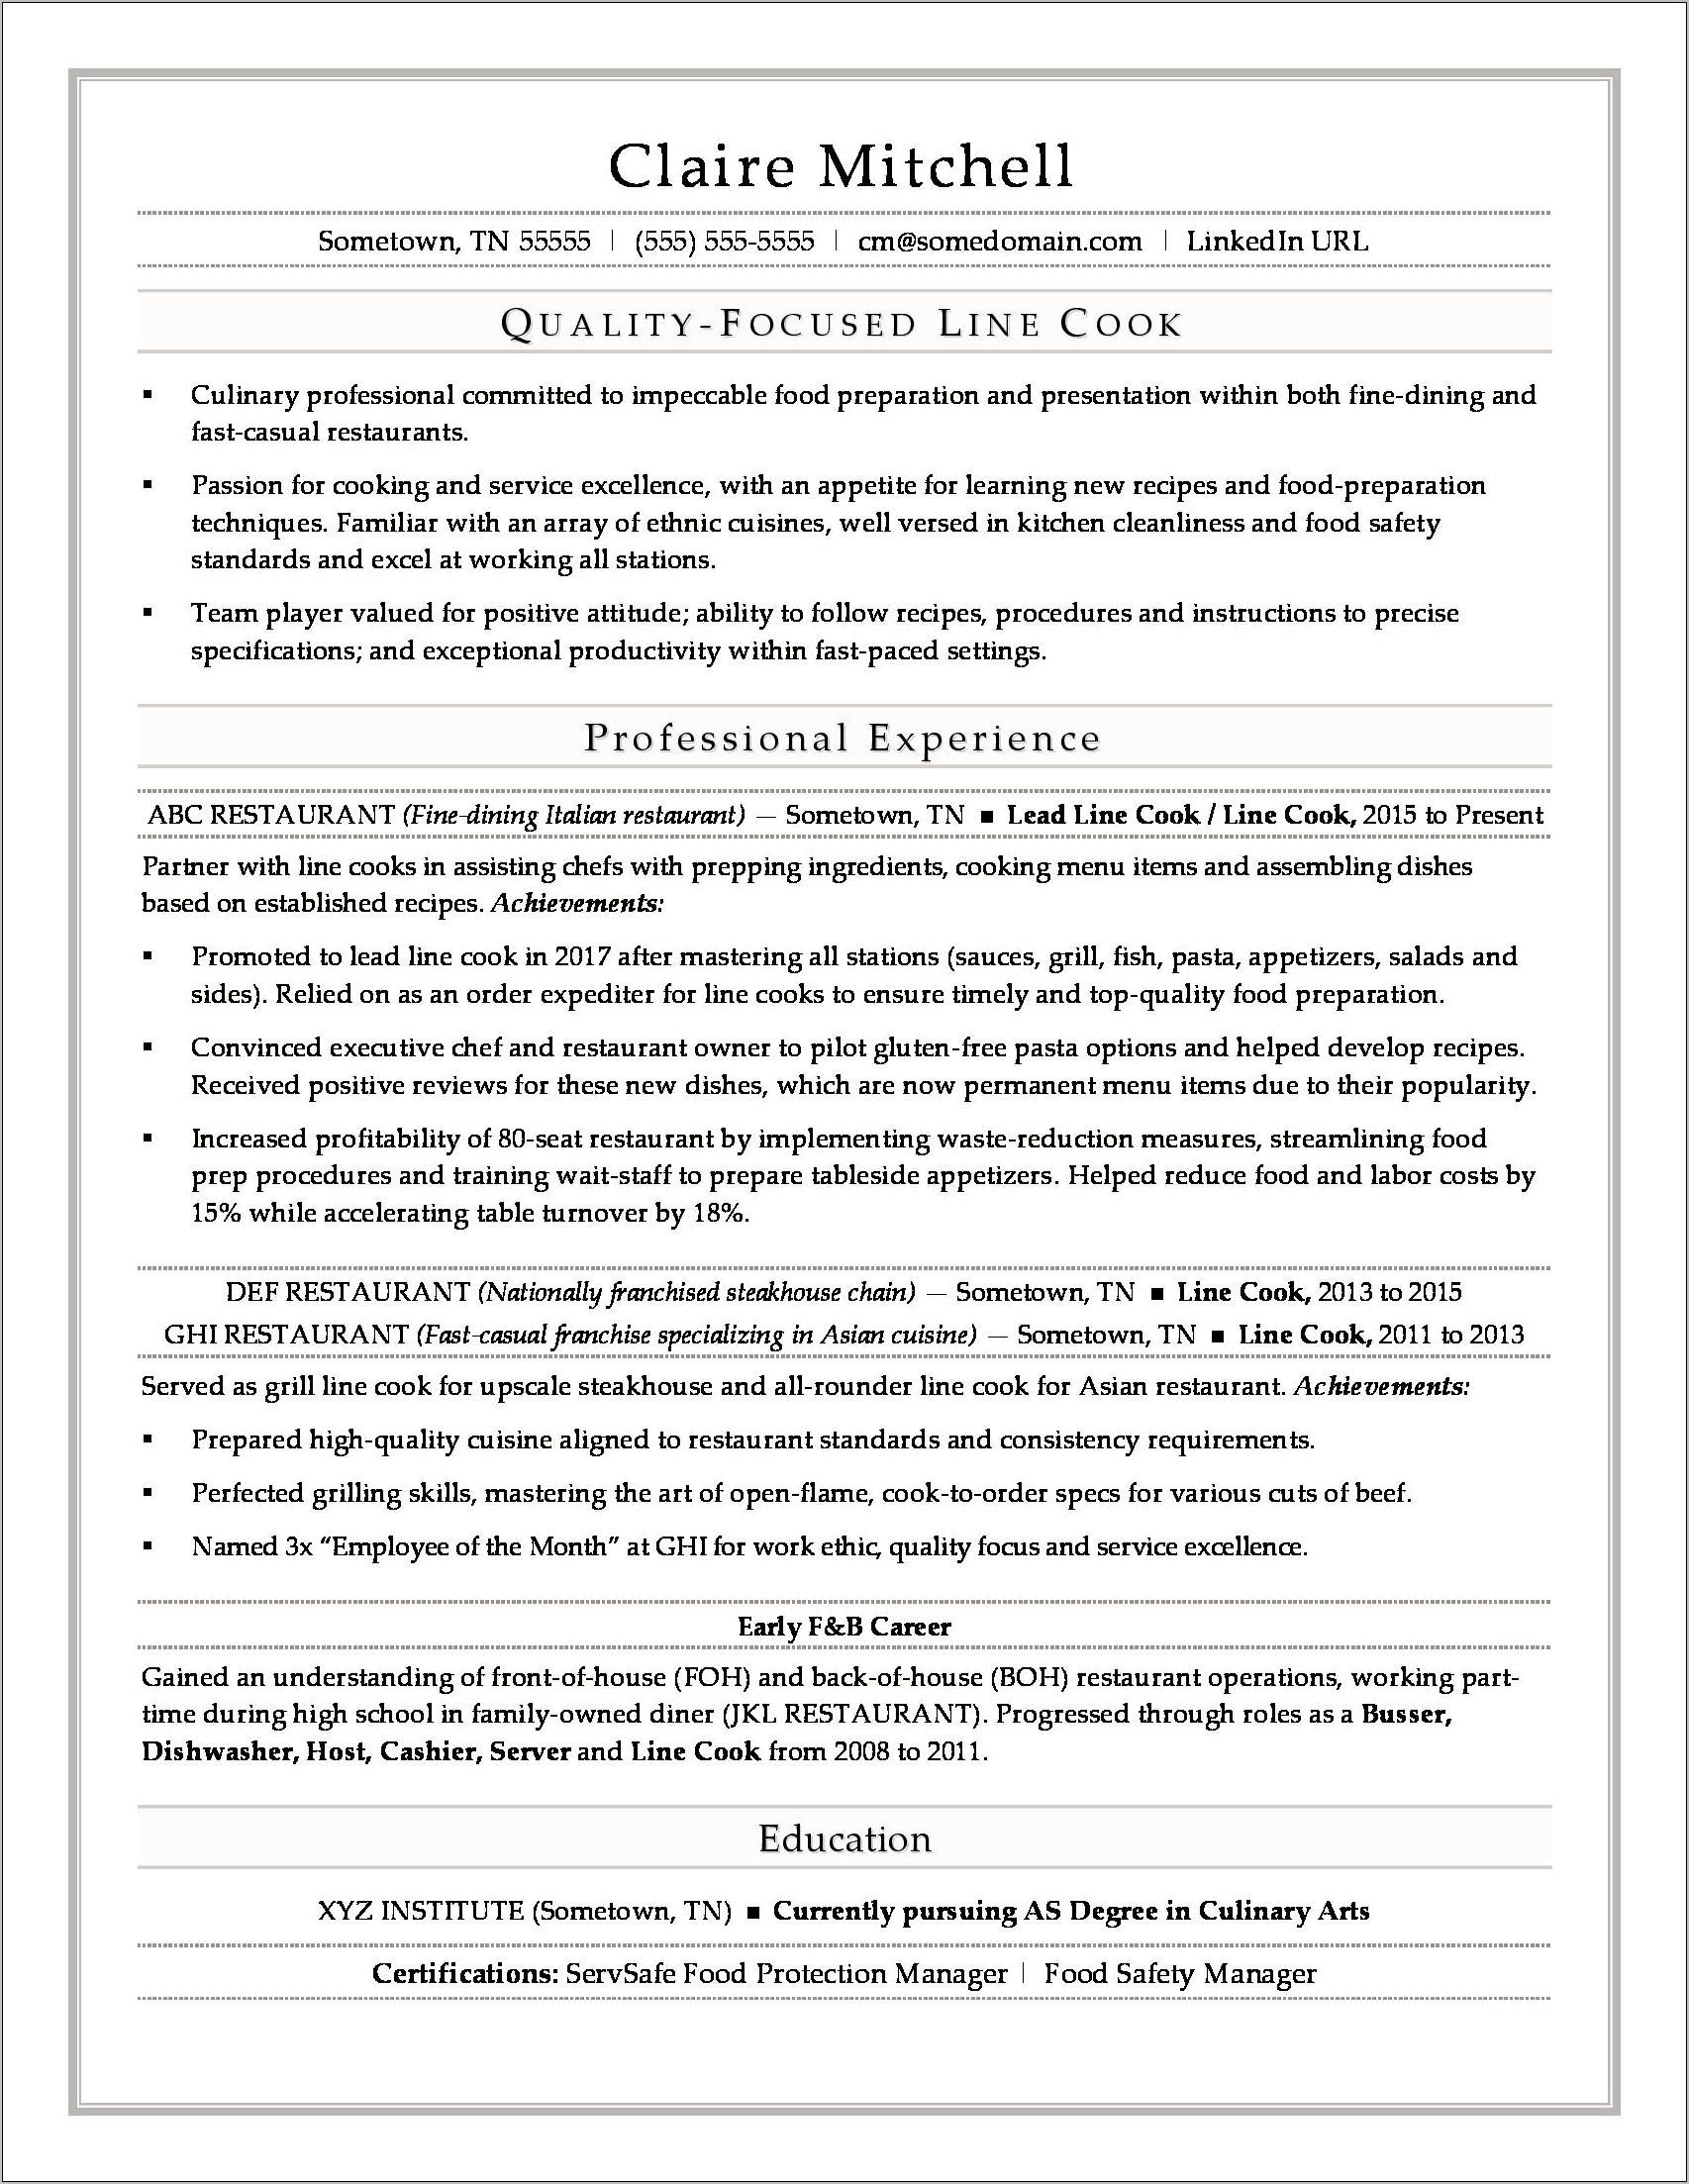 Sample Personal Summary For Chef Resume